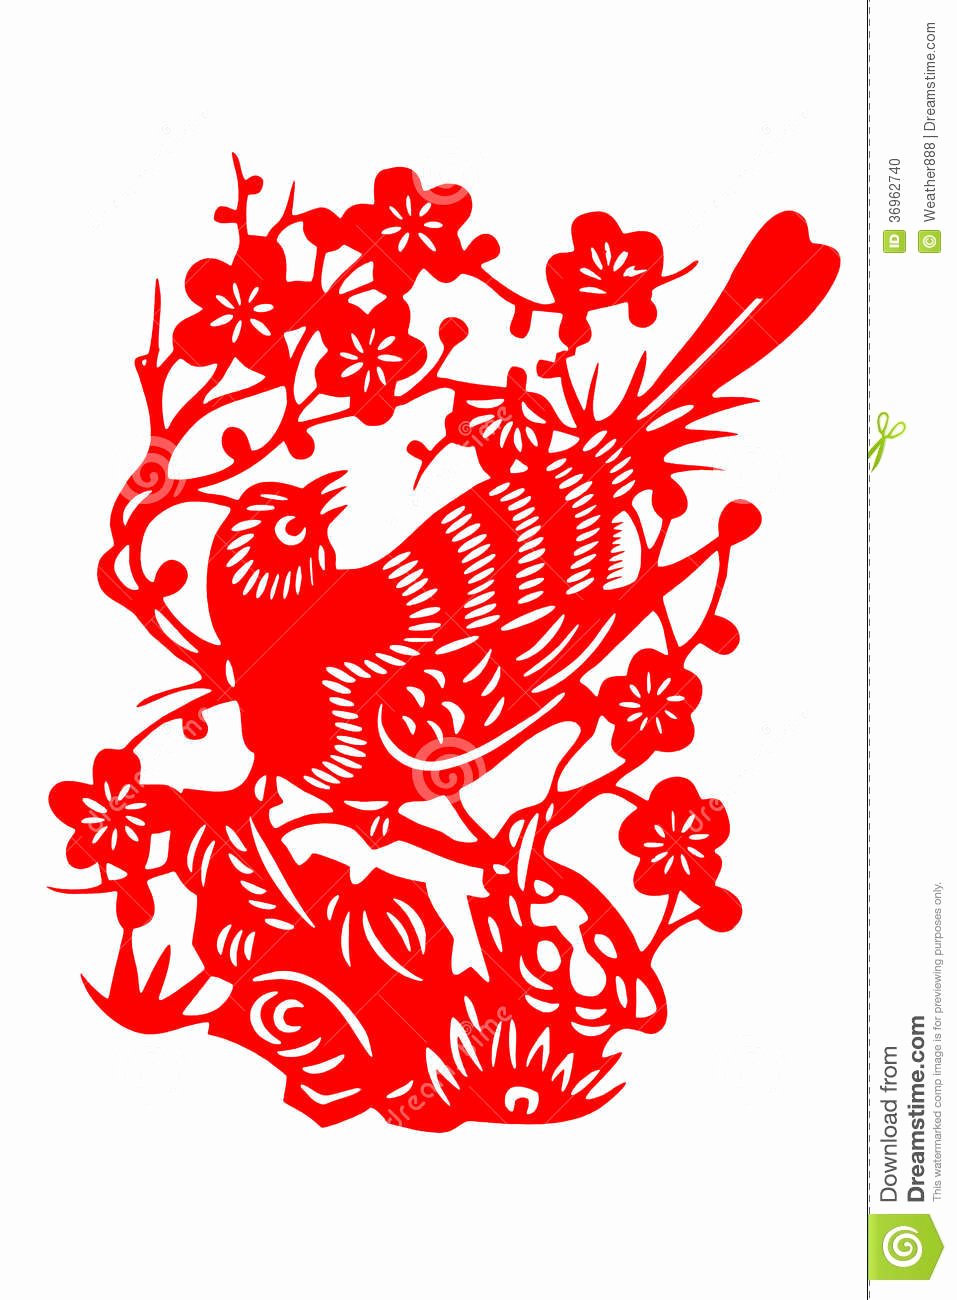 Chinese Paper Cutting Templates Luxury Chinese Paper Cut Bird Stock Image